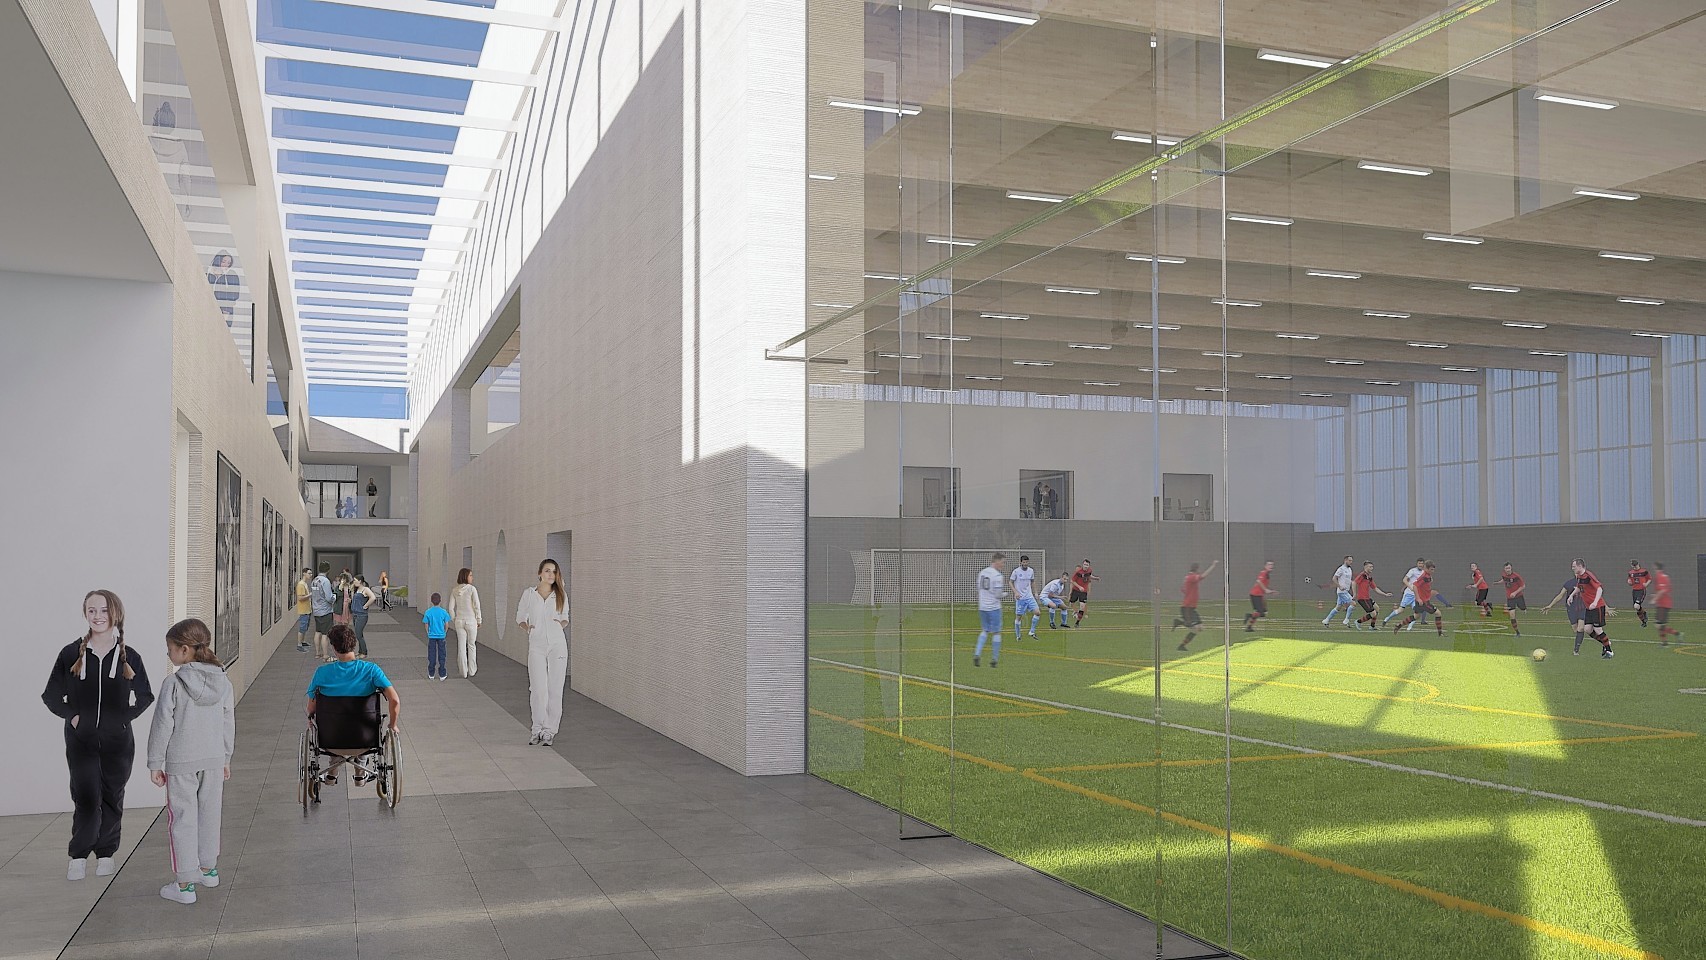 A look inside the proposed Garioch Sports and Community Centre